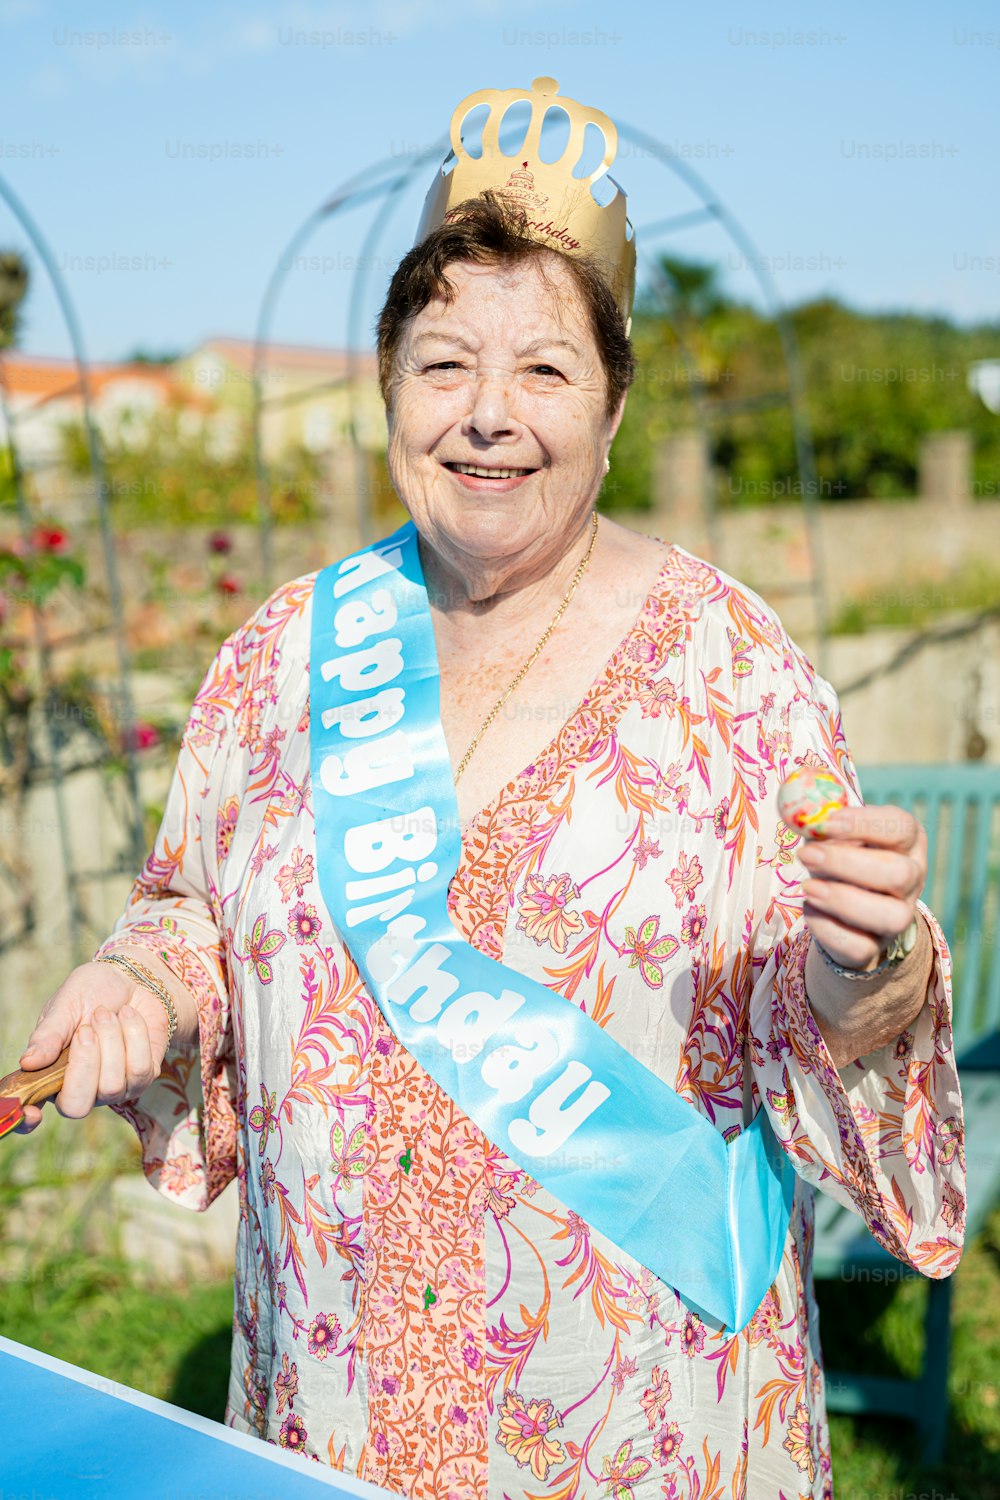 a woman wearing a tiara and holding a piece of cake